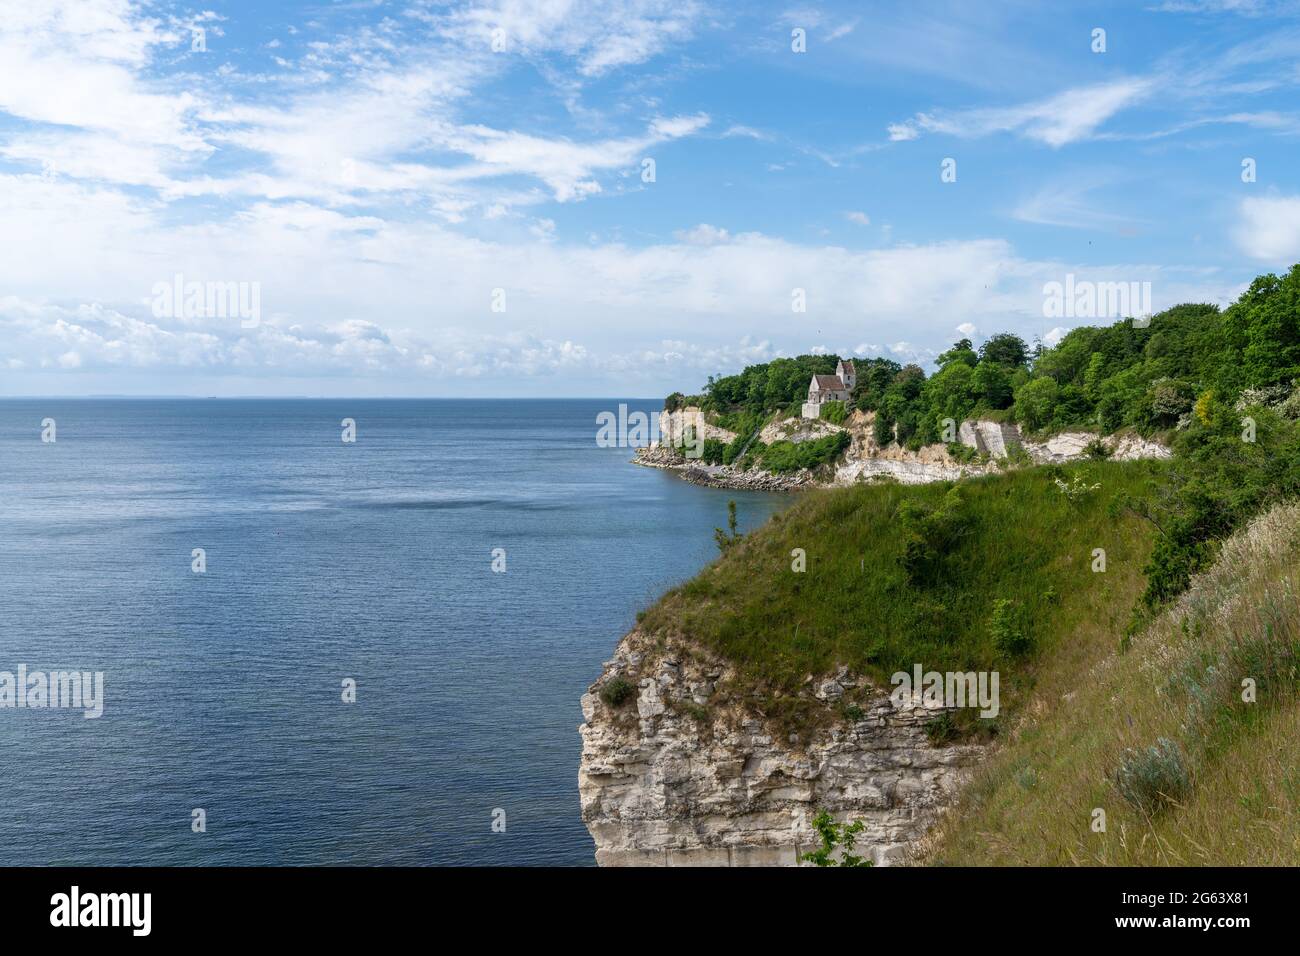 A view of the church at Hojerup on top of the white chalkstone cliffs of Stevns Klint Stock Photo